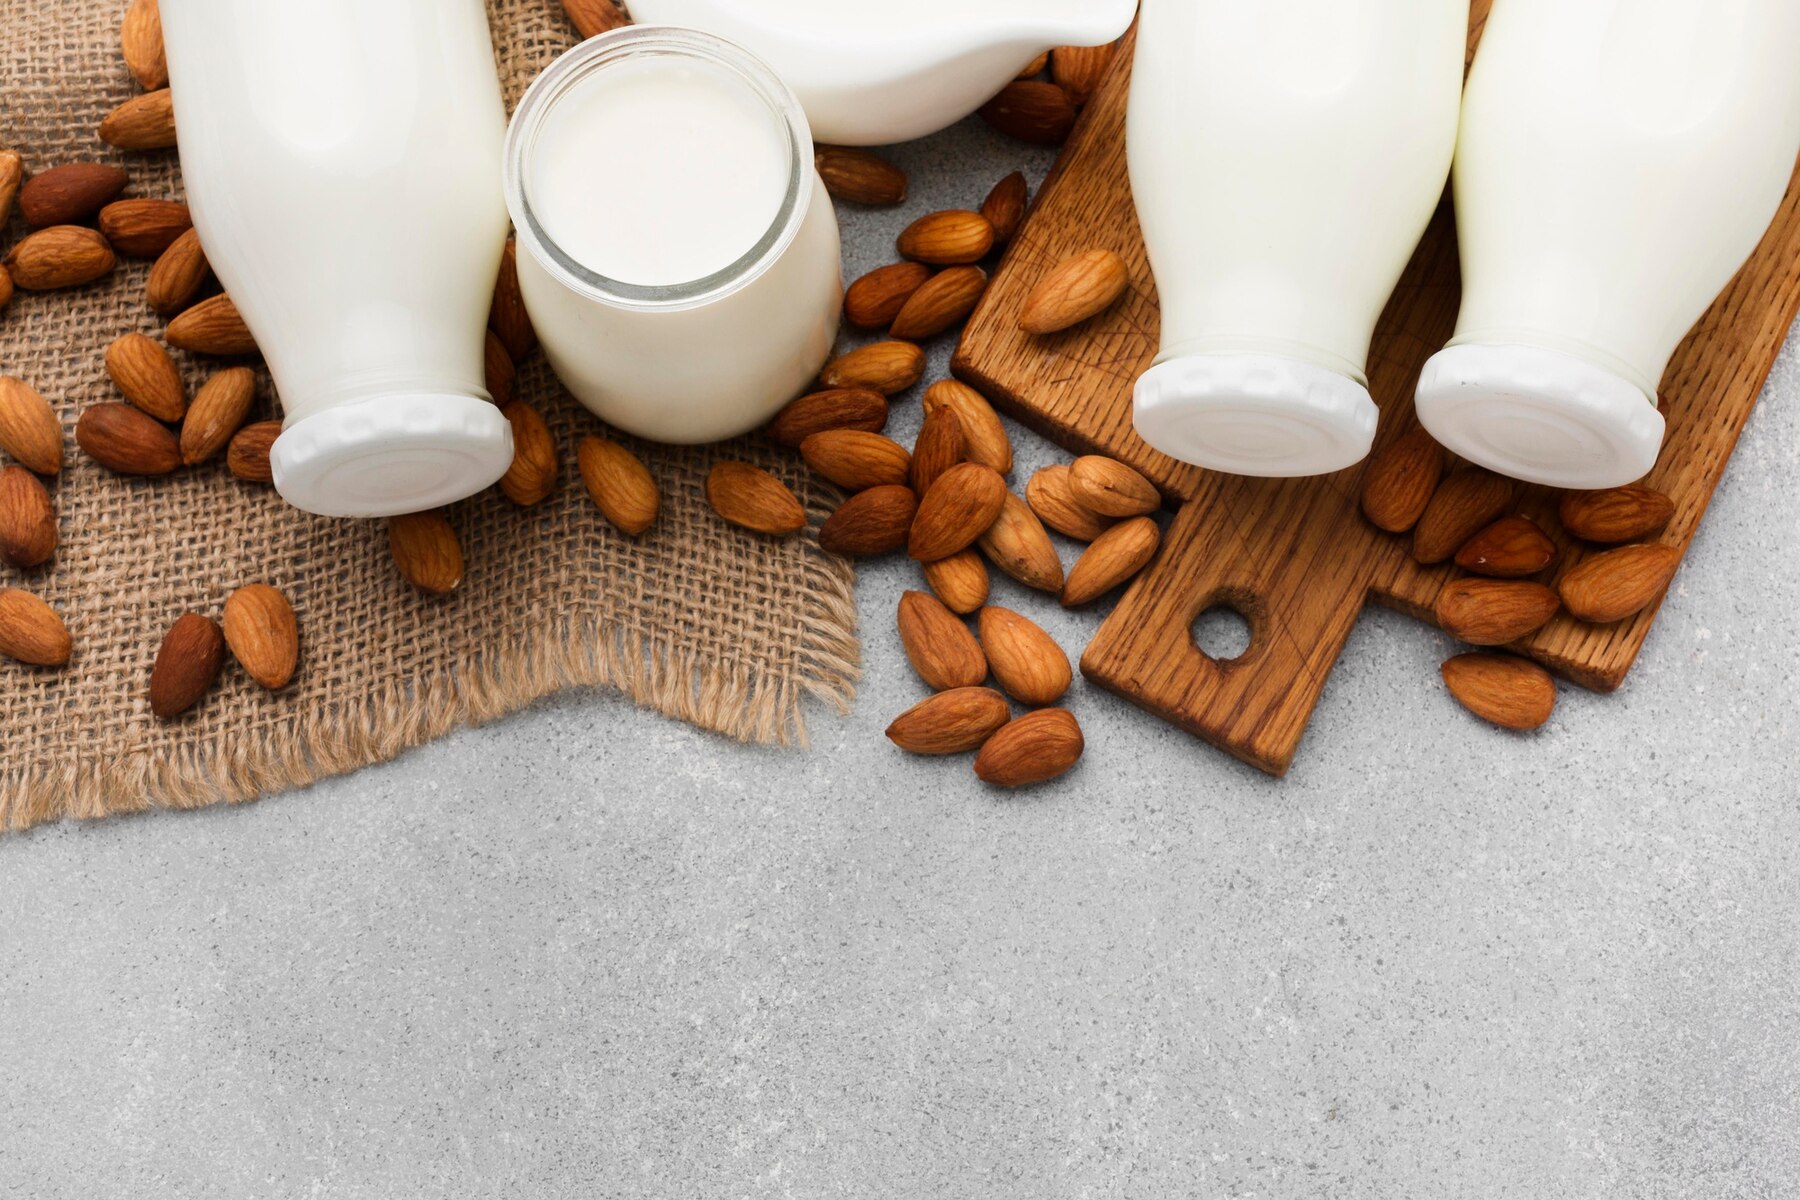 top-view-organic-milk-and-almonds-with-copy-space_23-2148610542 (1).jpg